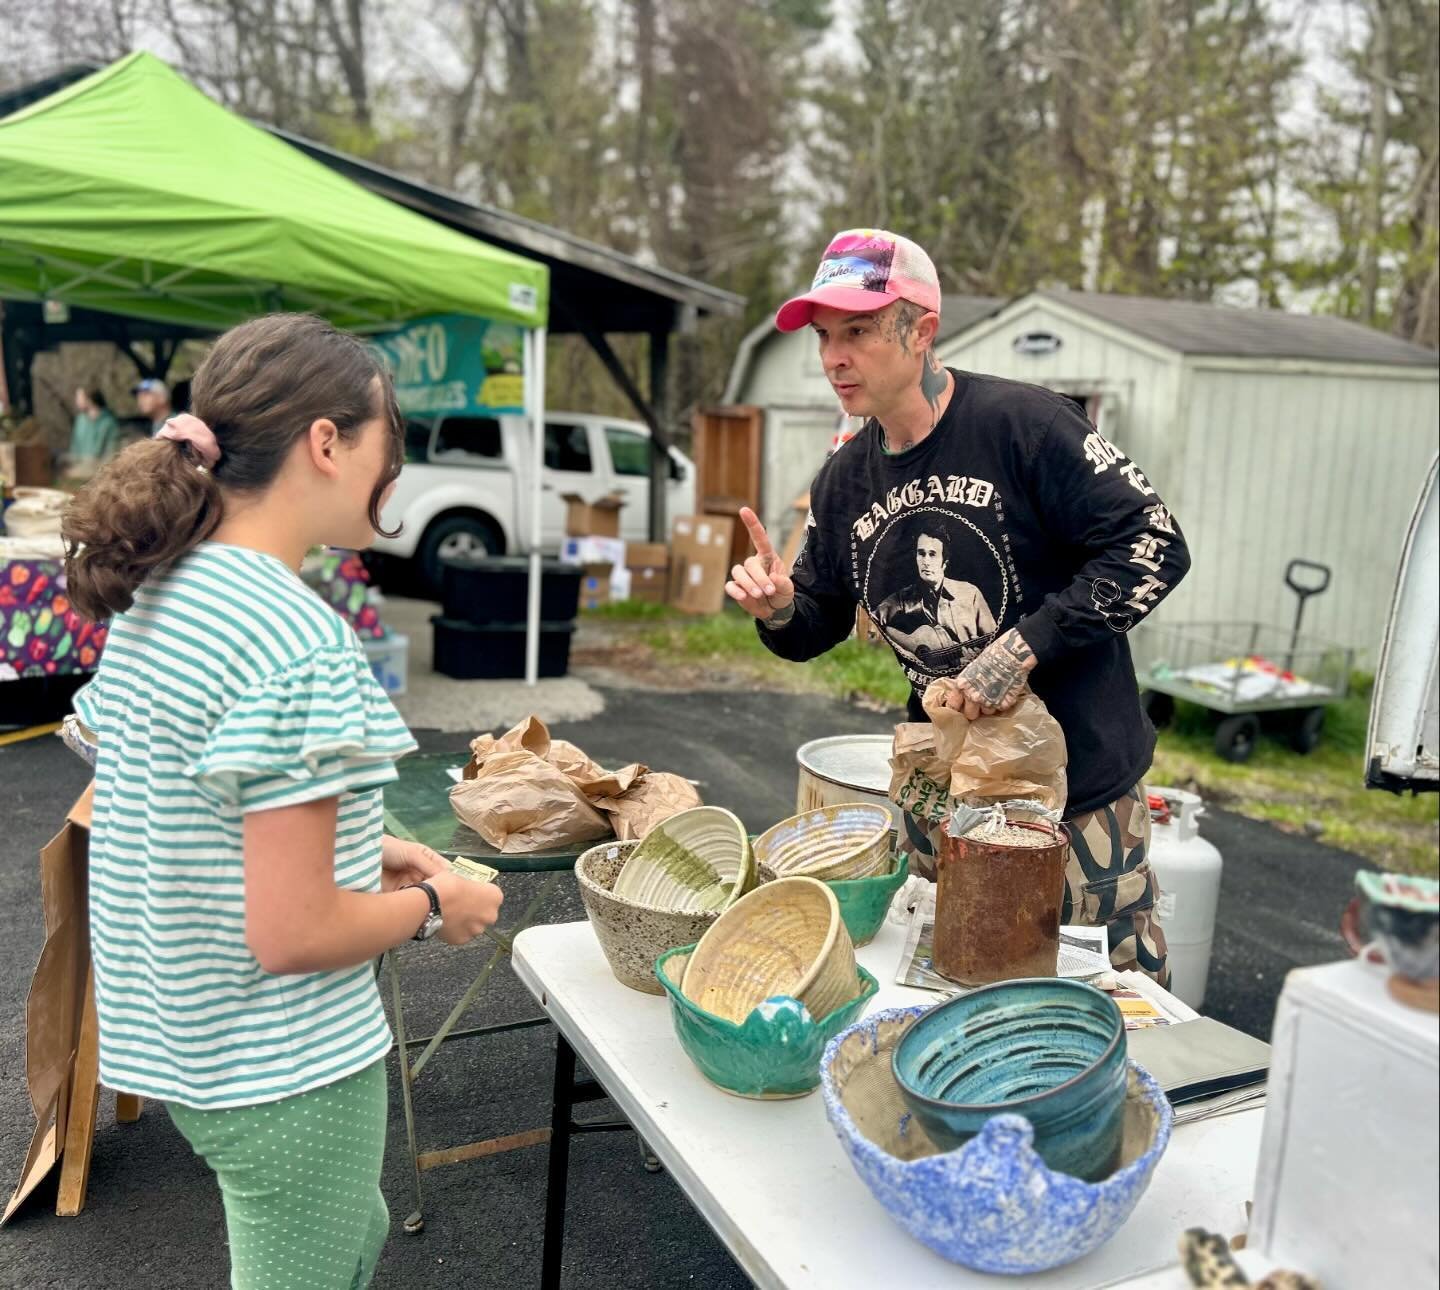 ⛅️Good morning Boone! We are out here enjoying a marvelous market day, and we hope you&rsquo;ll come join us! As we get further into April, our tables are getting  fuller and fuller - swipe to see a few of the fabulous products available now!💐

🖍️T